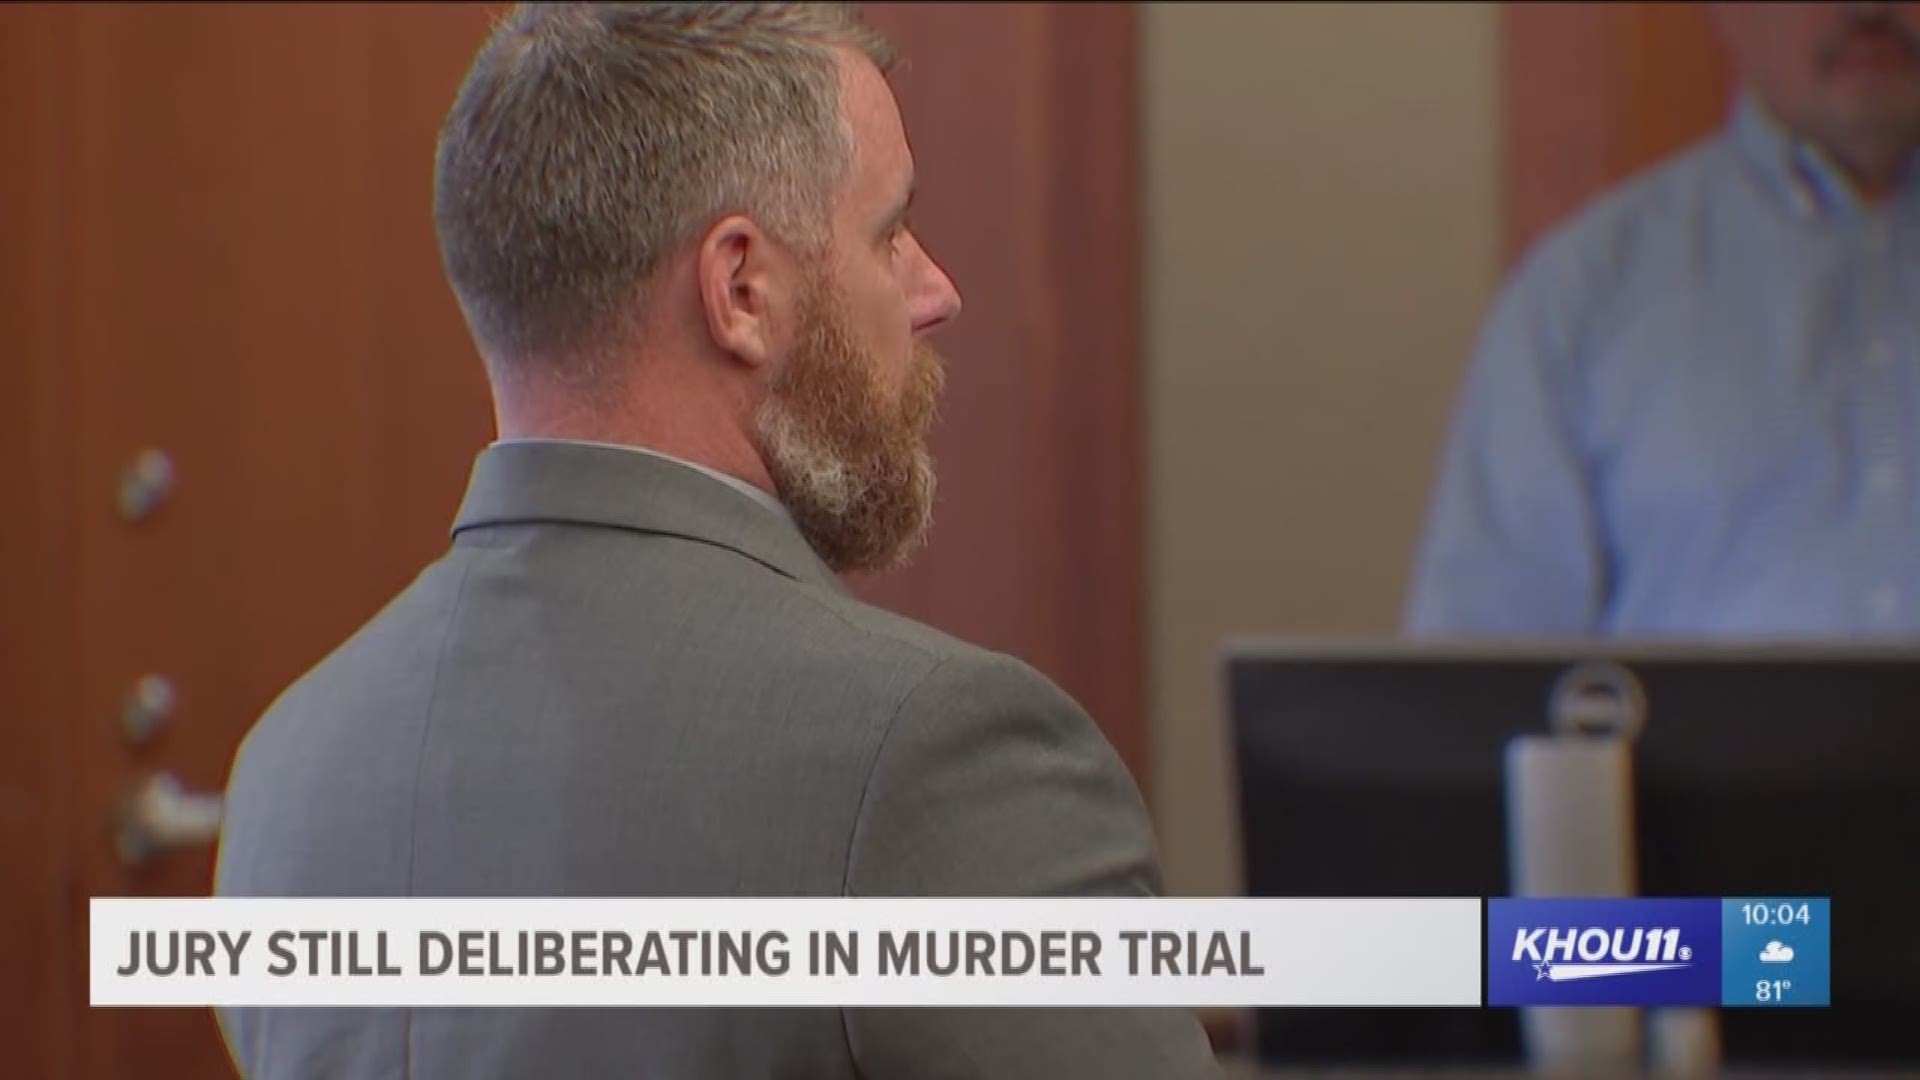 Jurors are still deliberating the fate of Terry Thompson, the man accused of killing 24-year-old John Hernandez outside a Sheldon-area Denny's restaurant last May.